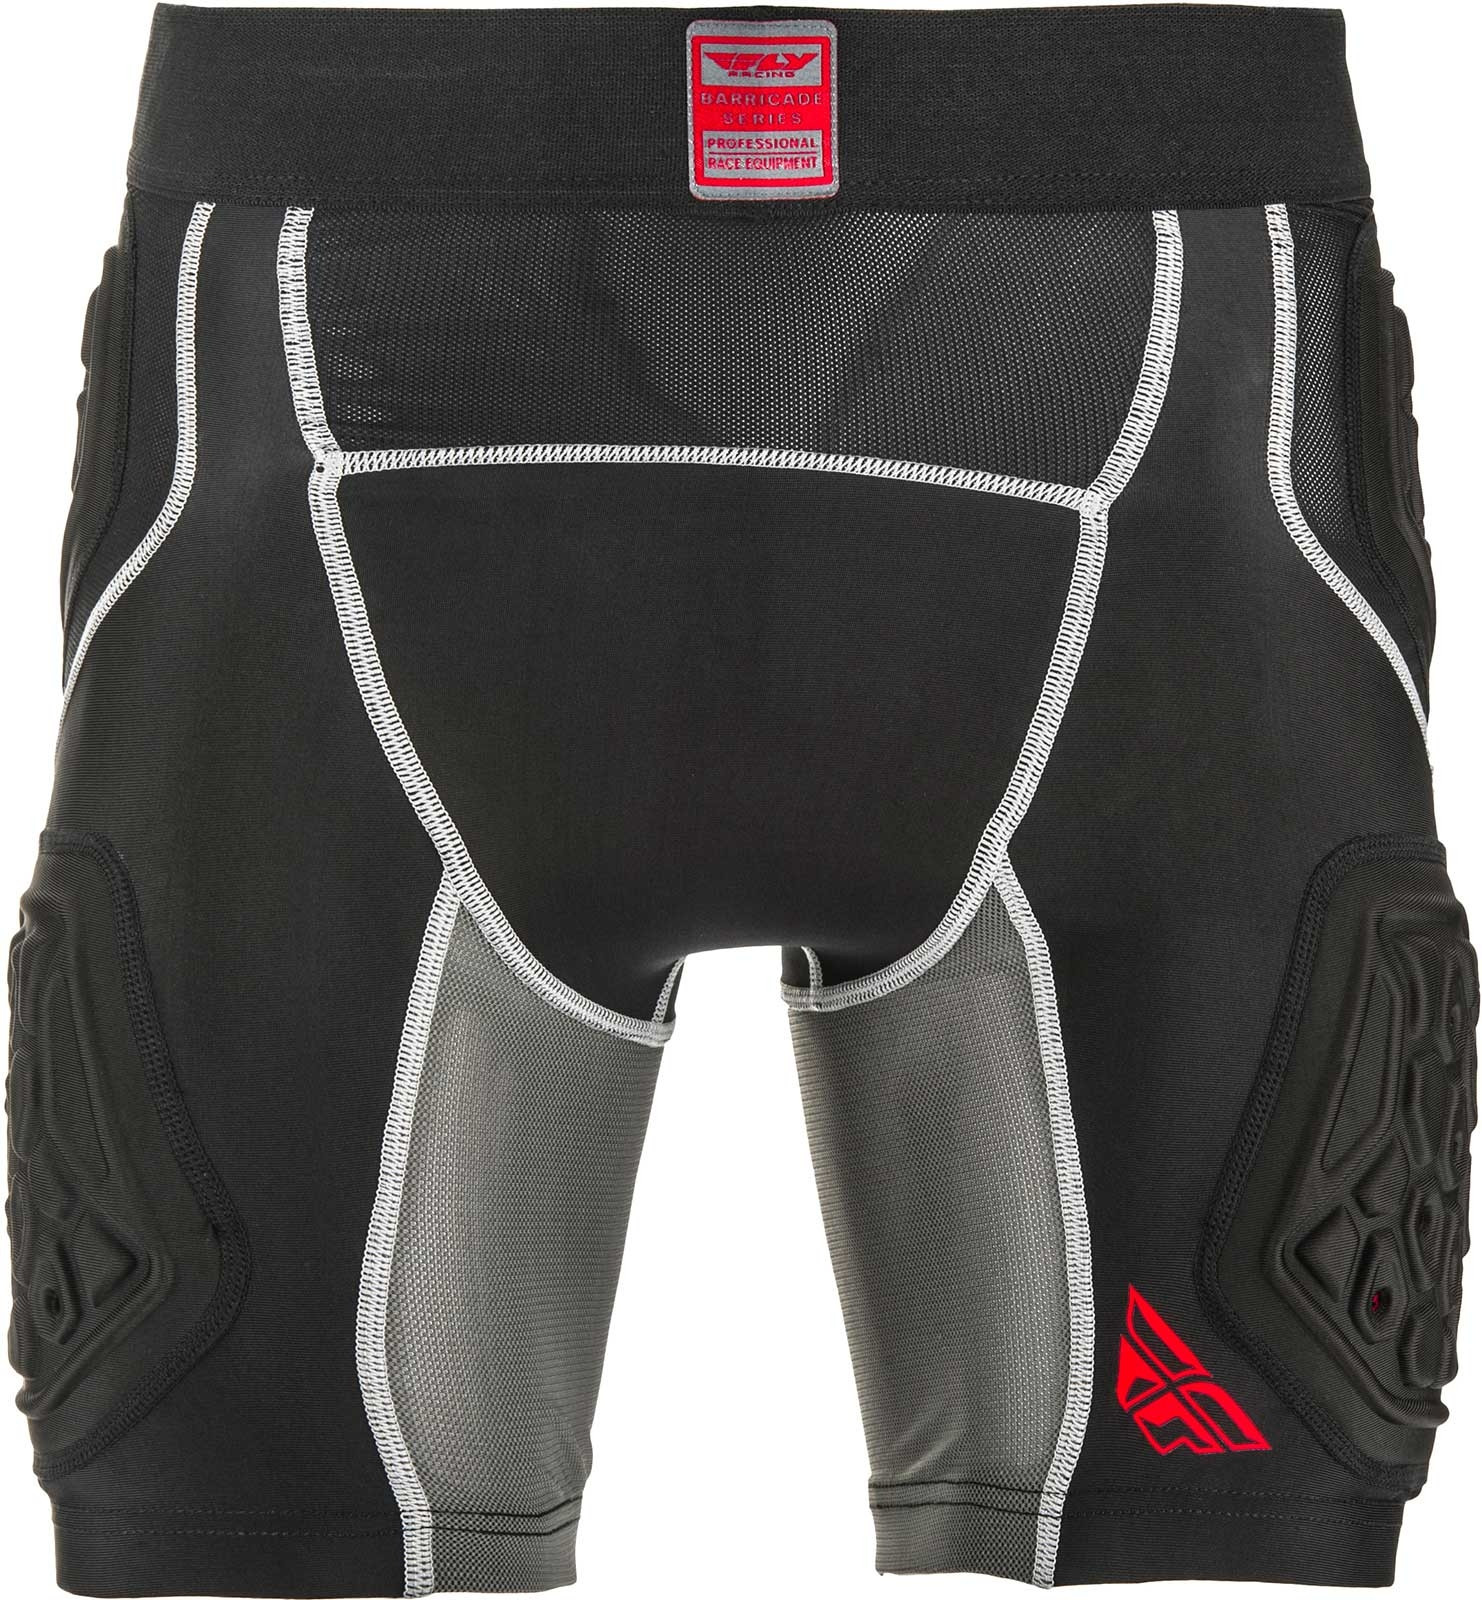 Fly Racing Barricade Compression Riding Short 360-9755